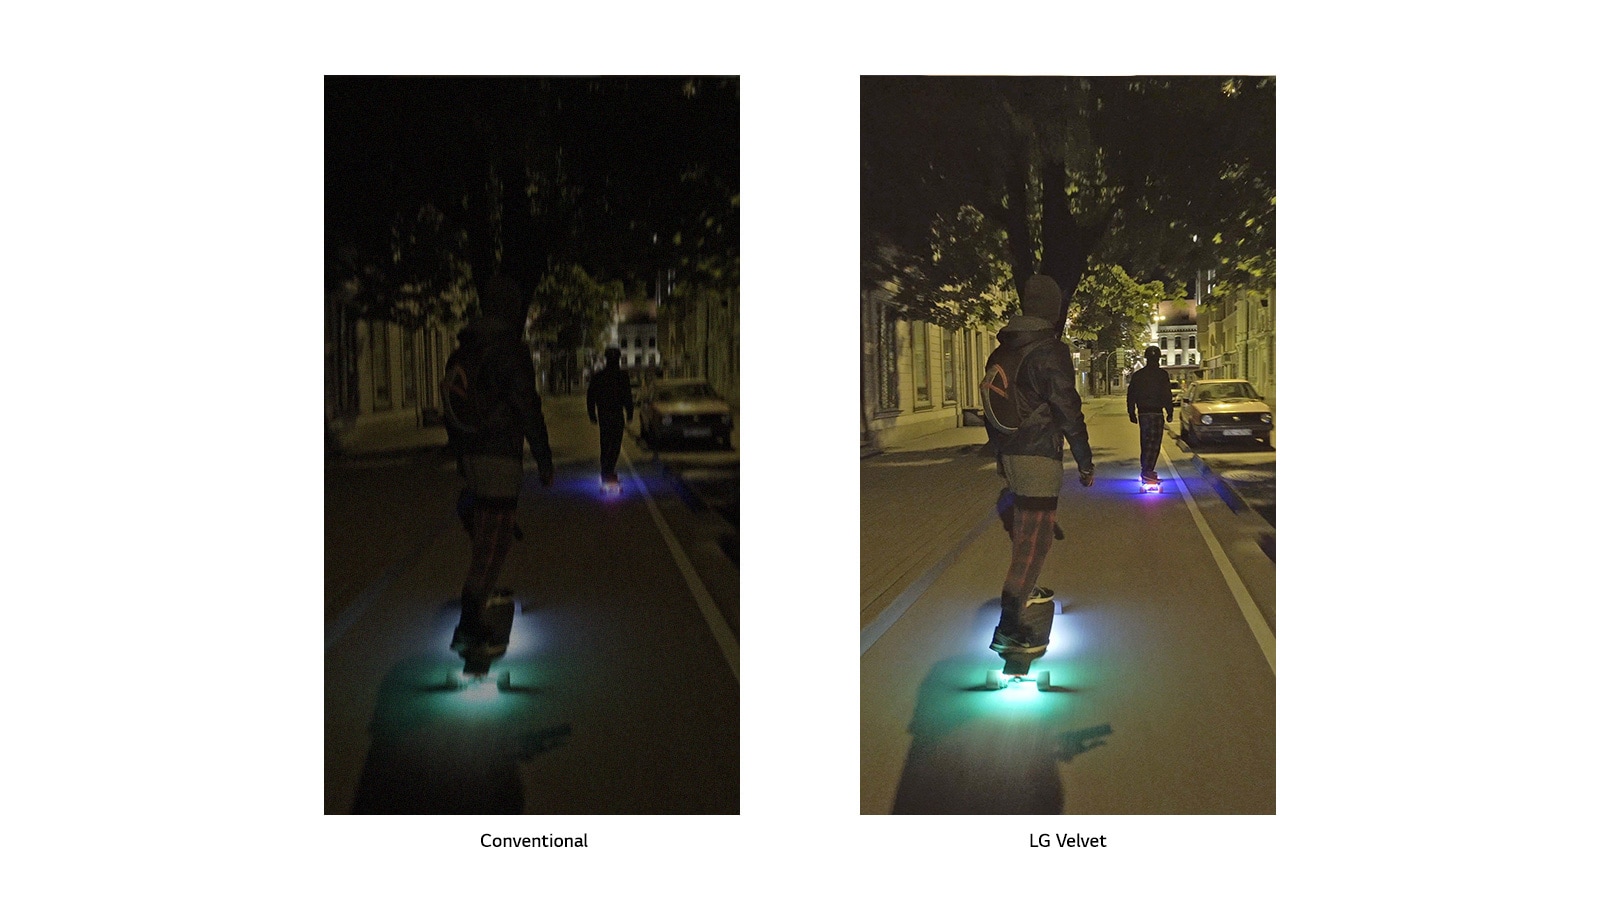 Two men riding skateboard in the streets at night.